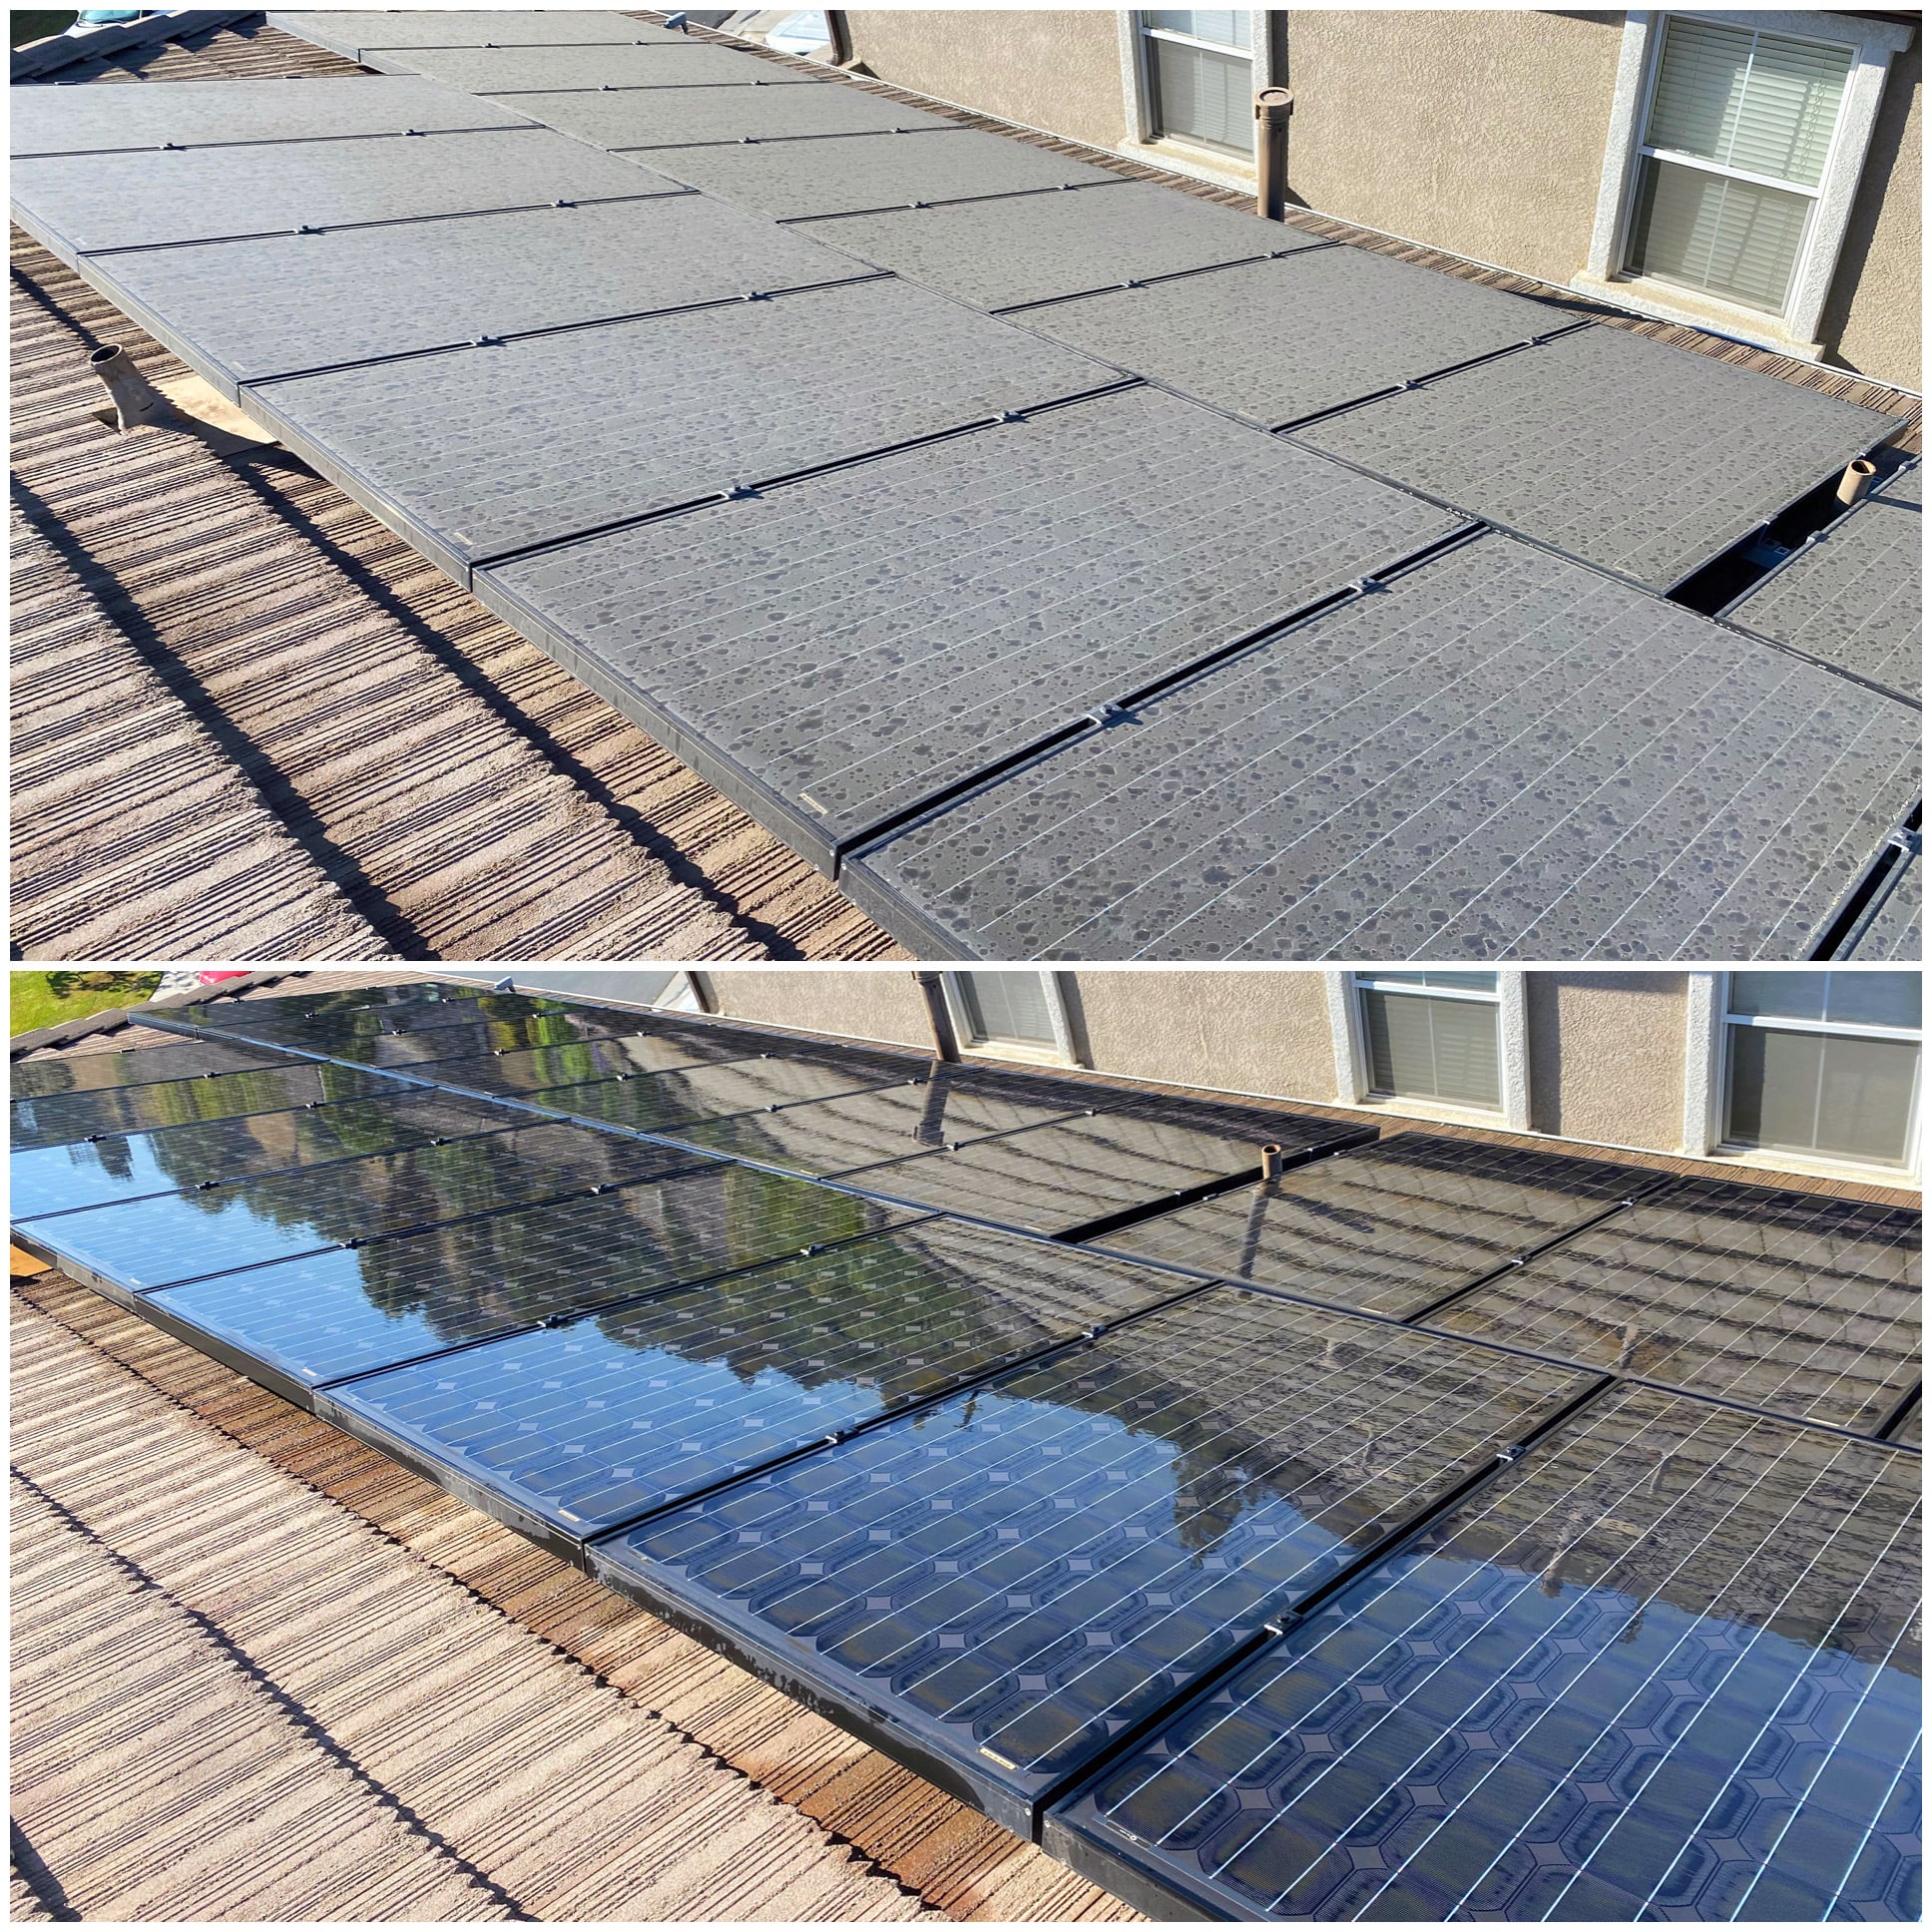 before and after of solar panel cleaning